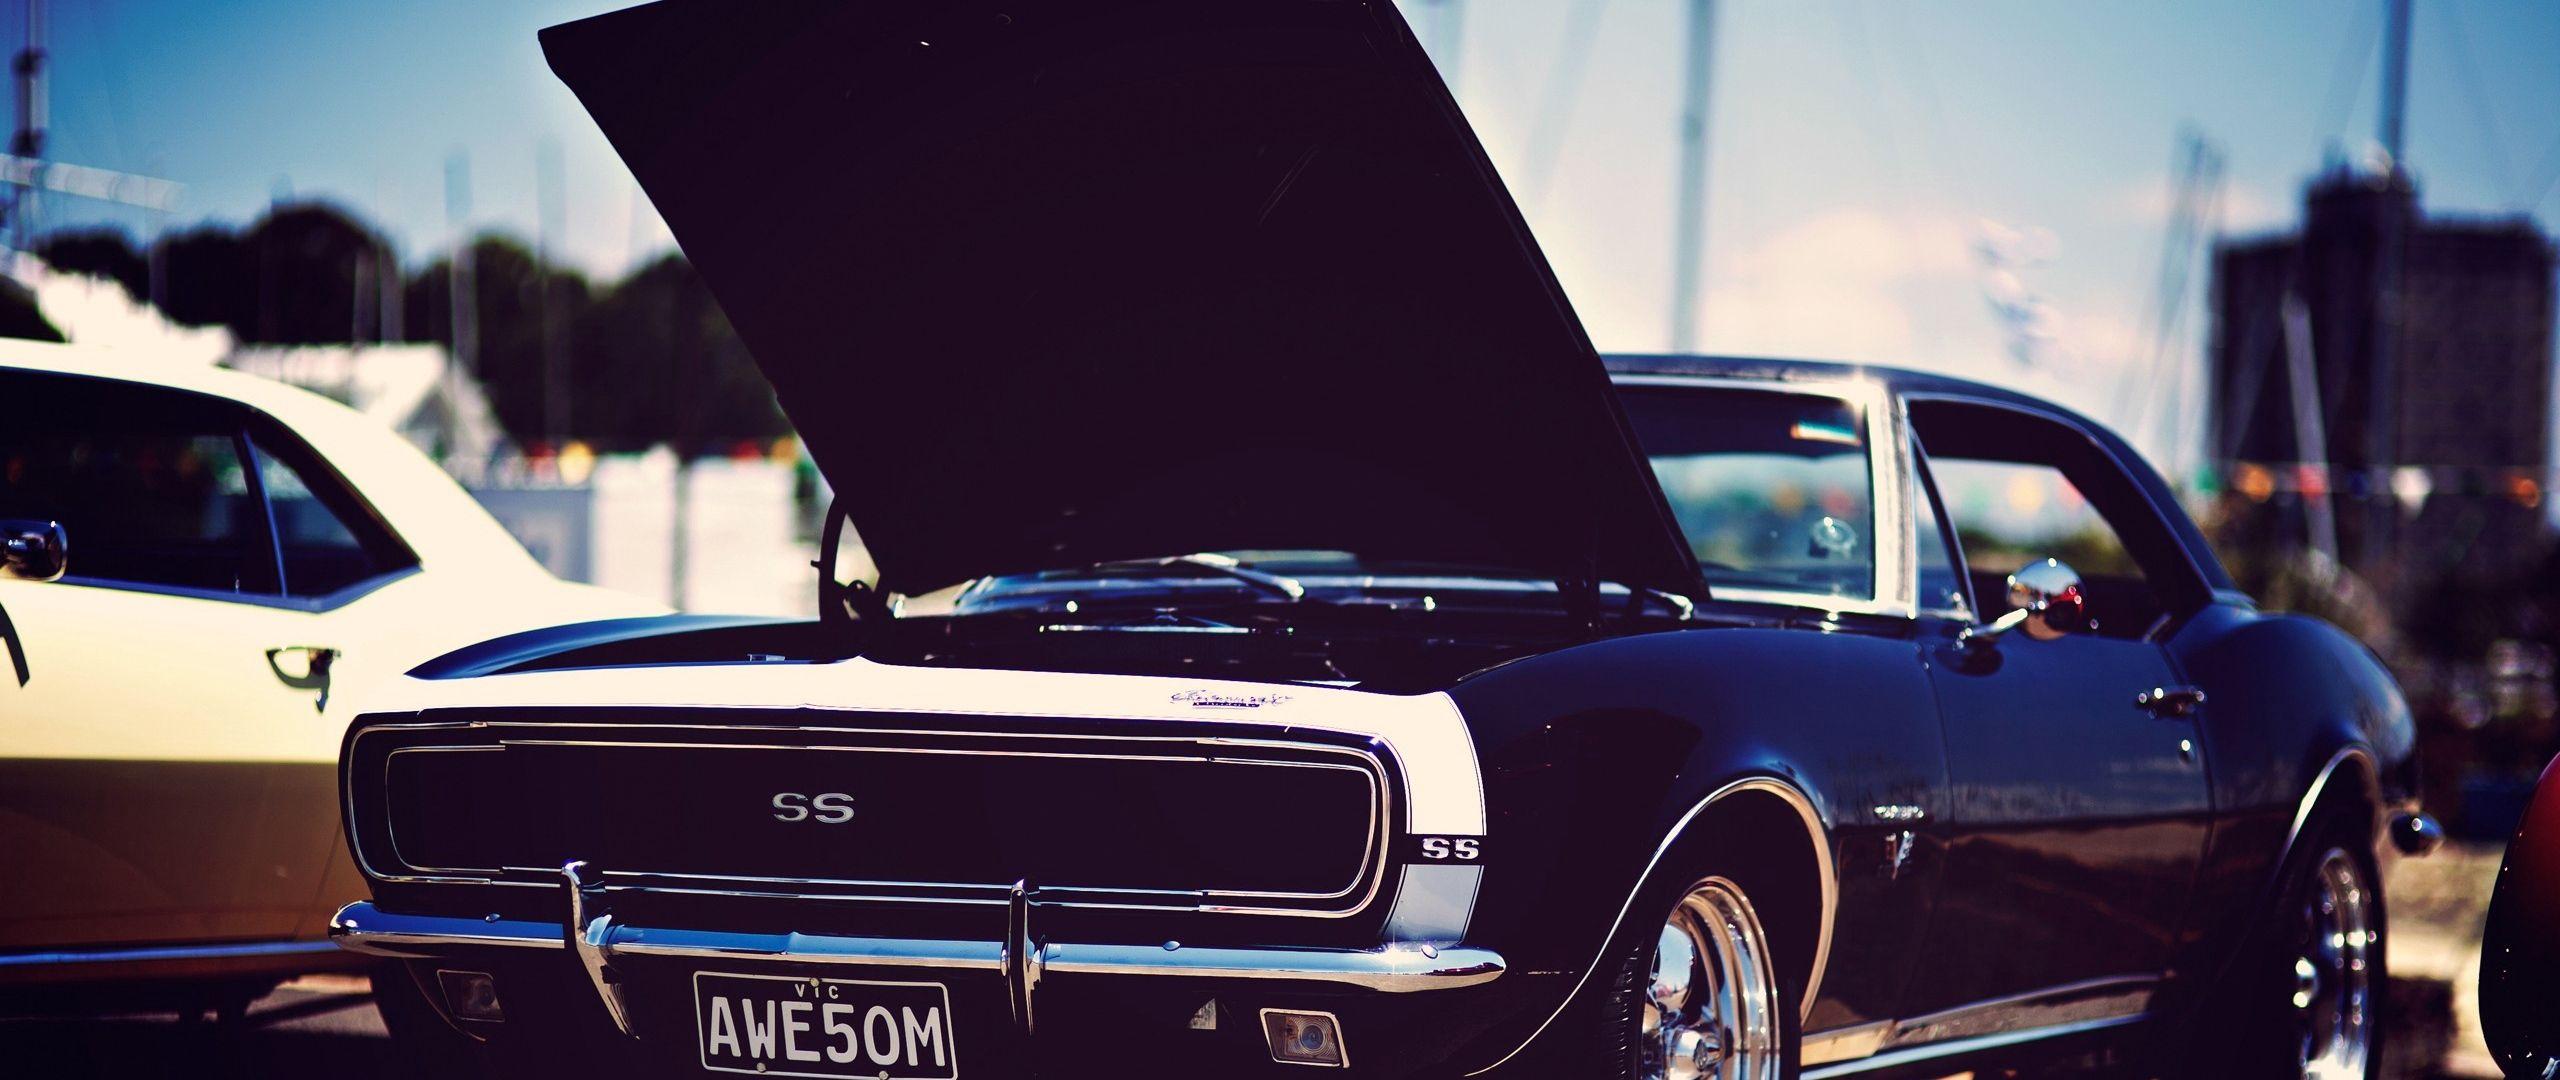 Download wallpaper 2560x1080 american cars, muscle, stylish, car